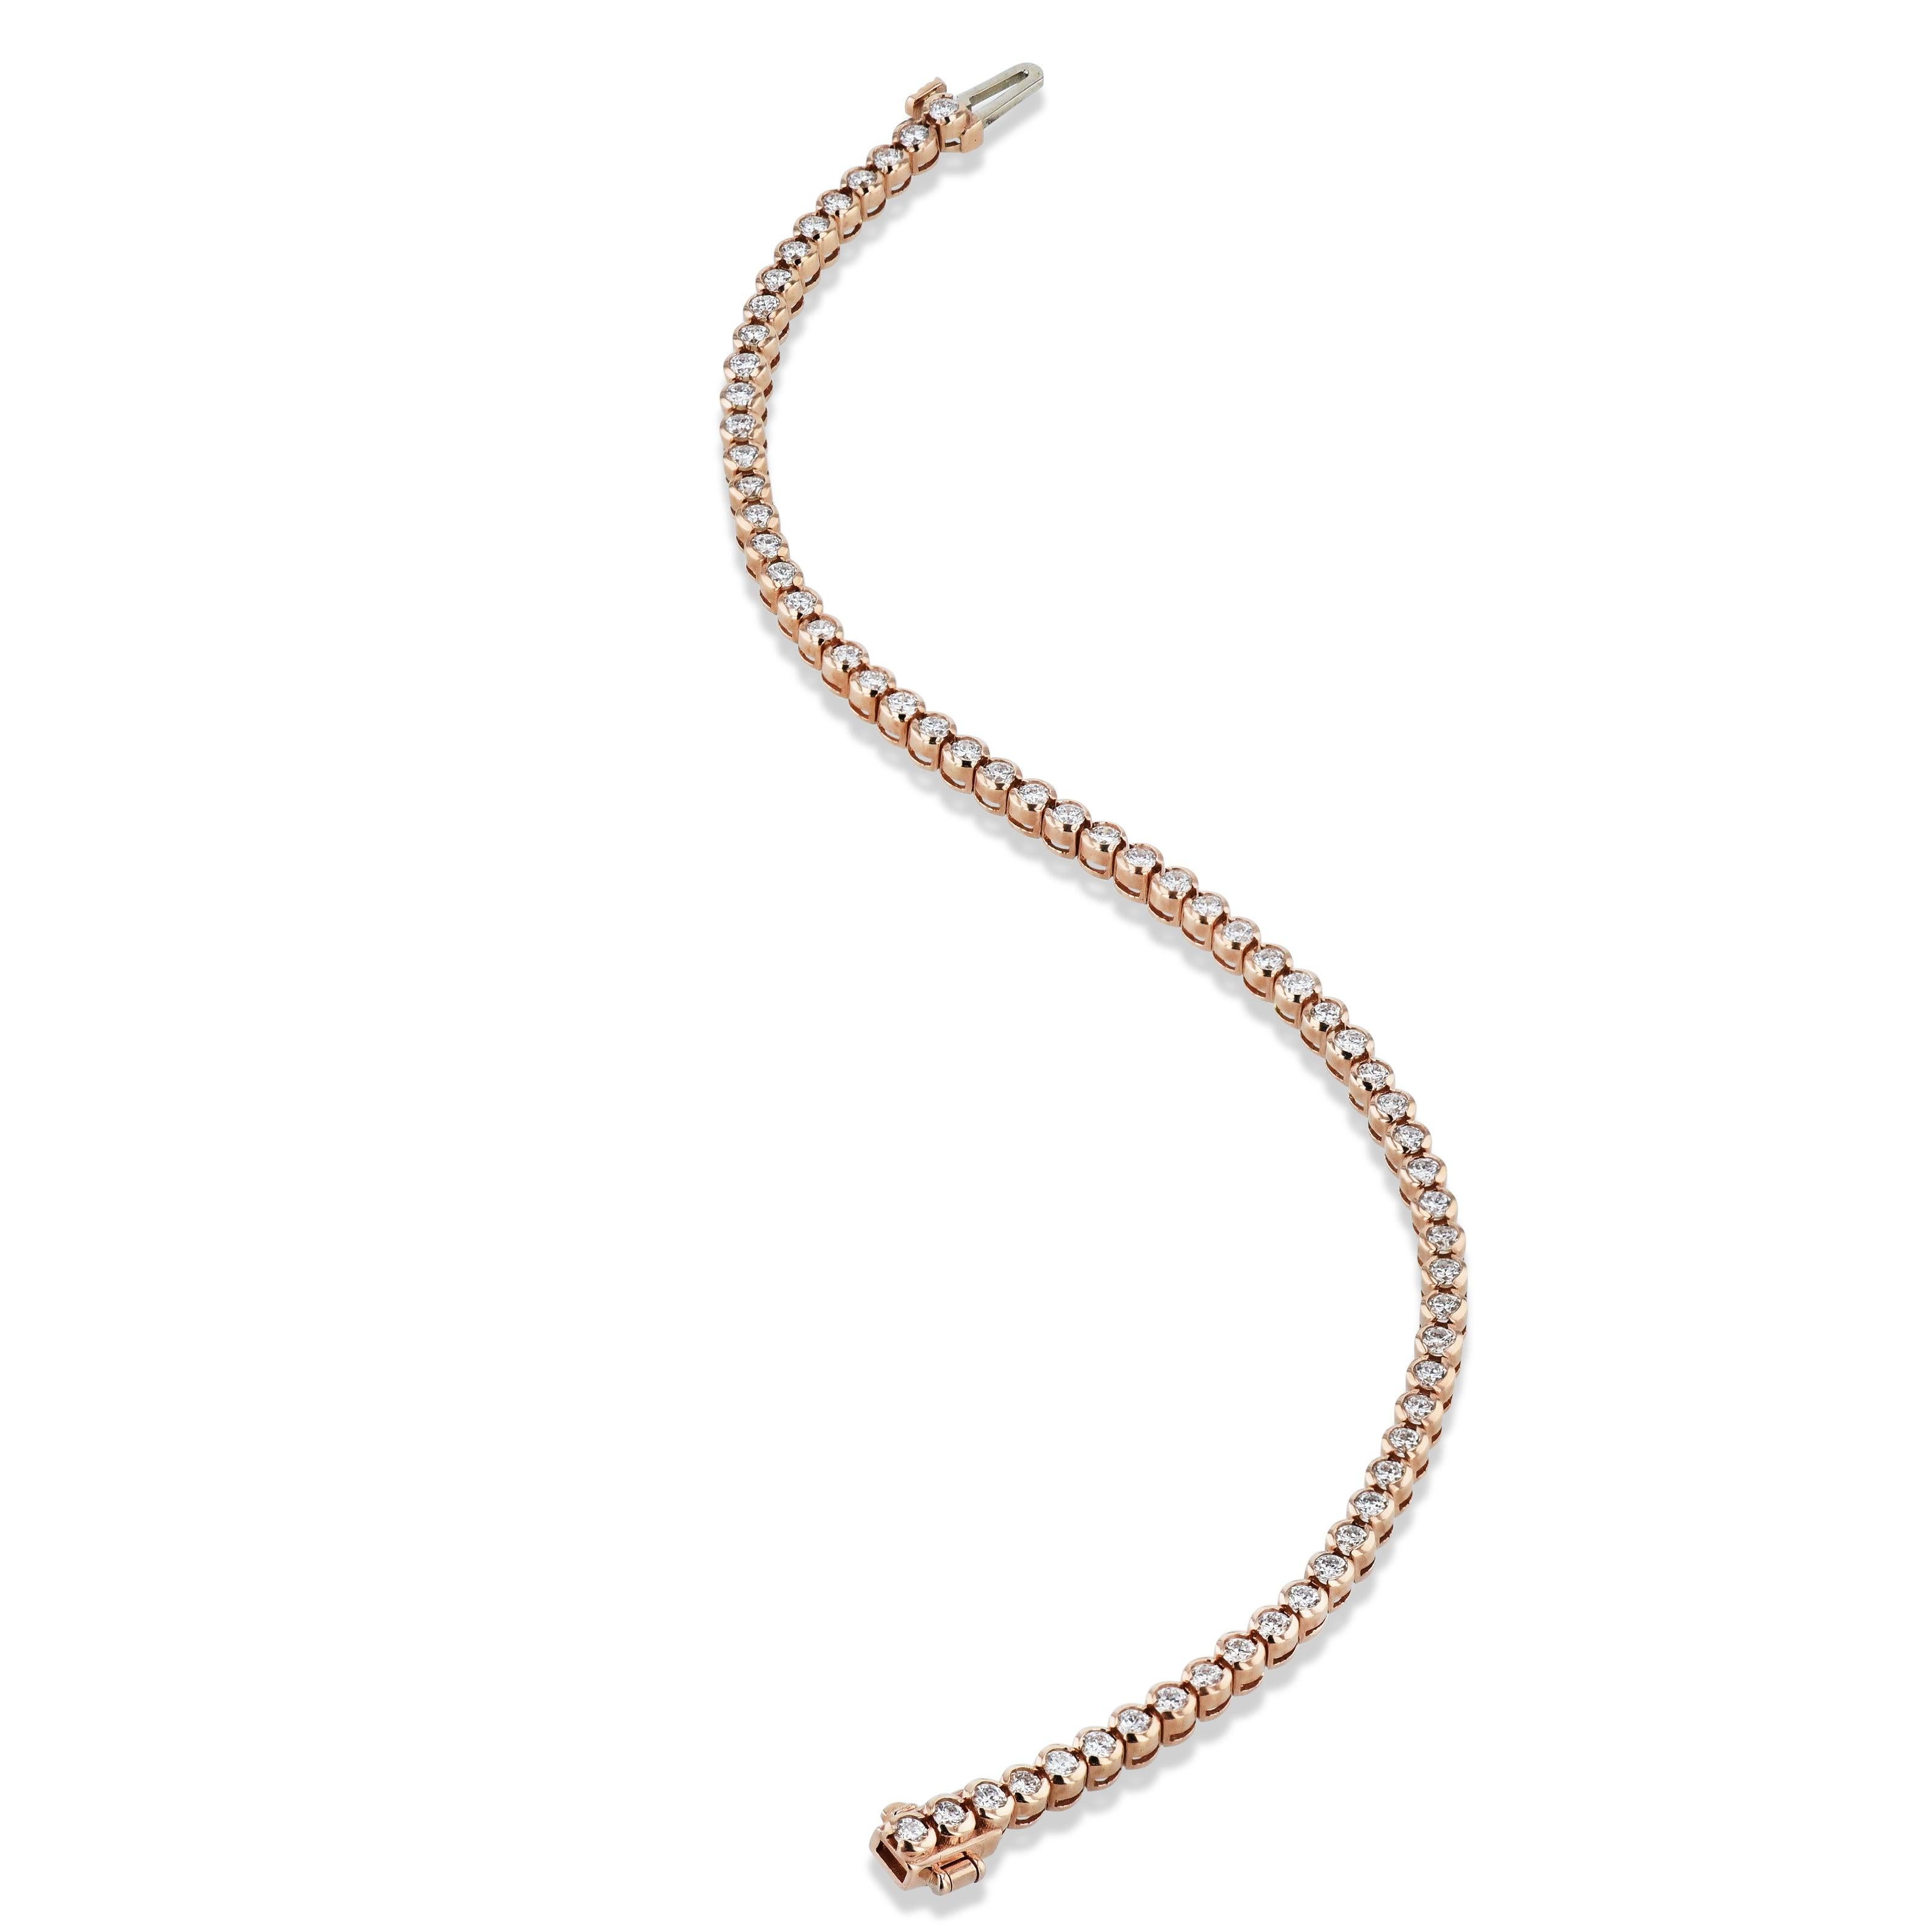 Glimmer and shine on your wrist with this dazzling 14kt. Rose Gold Semi-Bezel set Diamond Tennis Bracelet from H&H Collection! Boasting 2.10ct of  diamonds, this handmade piece will leave you breathless.
Diamond Pink Gold Tennis Bracelet
14kt. Pink